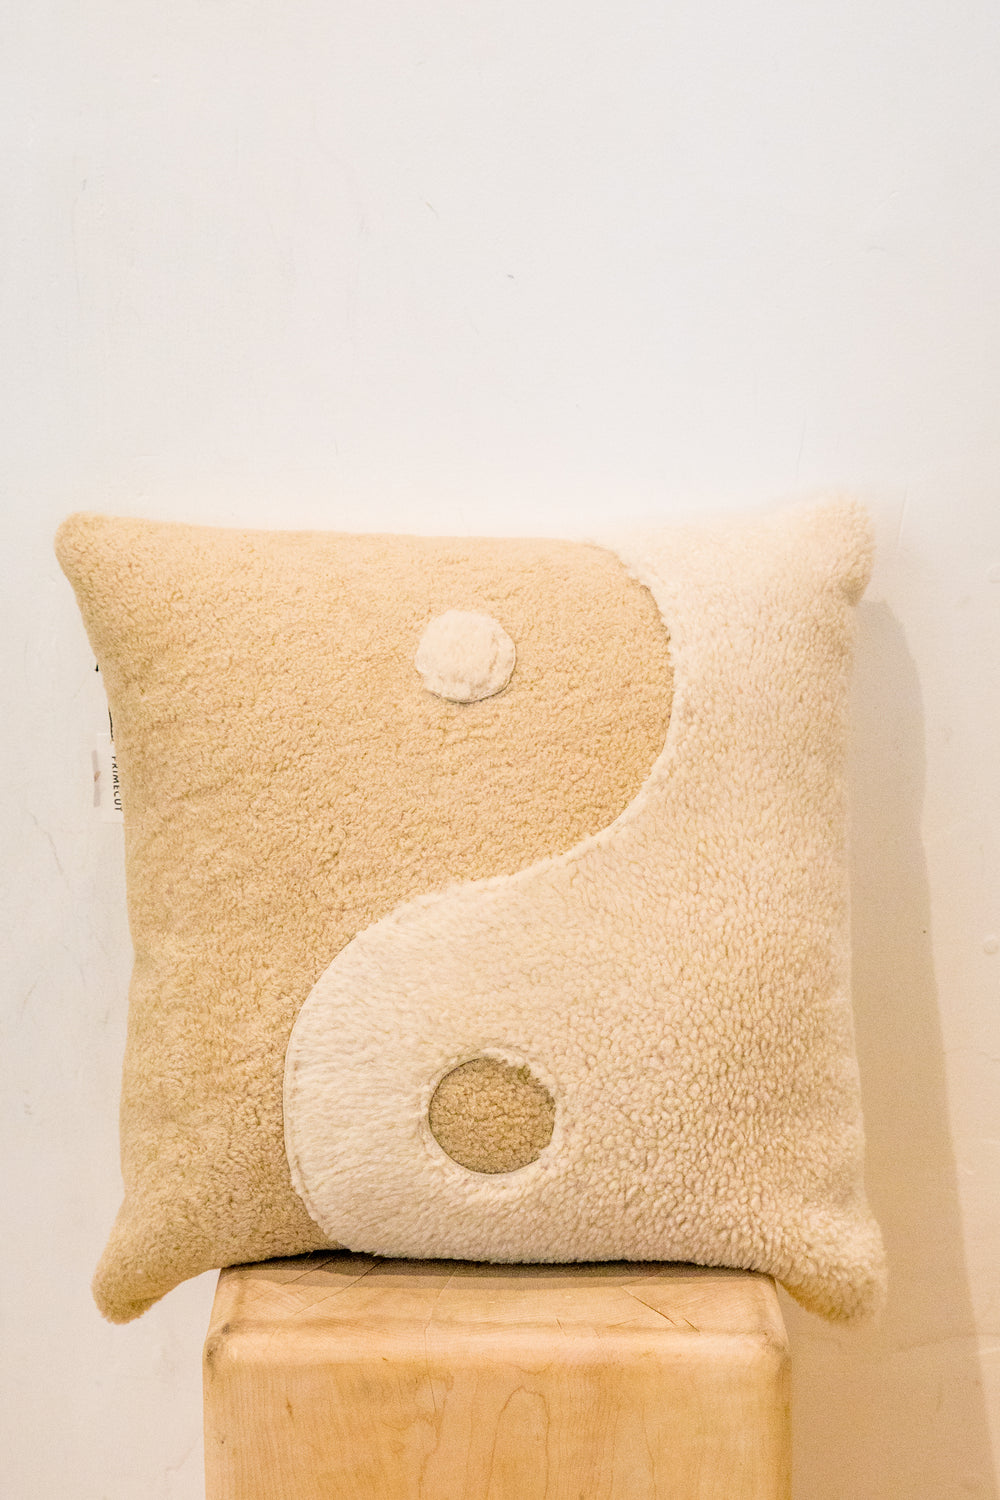 X Prism Beige + White Yin Yang Patchwork Pillow